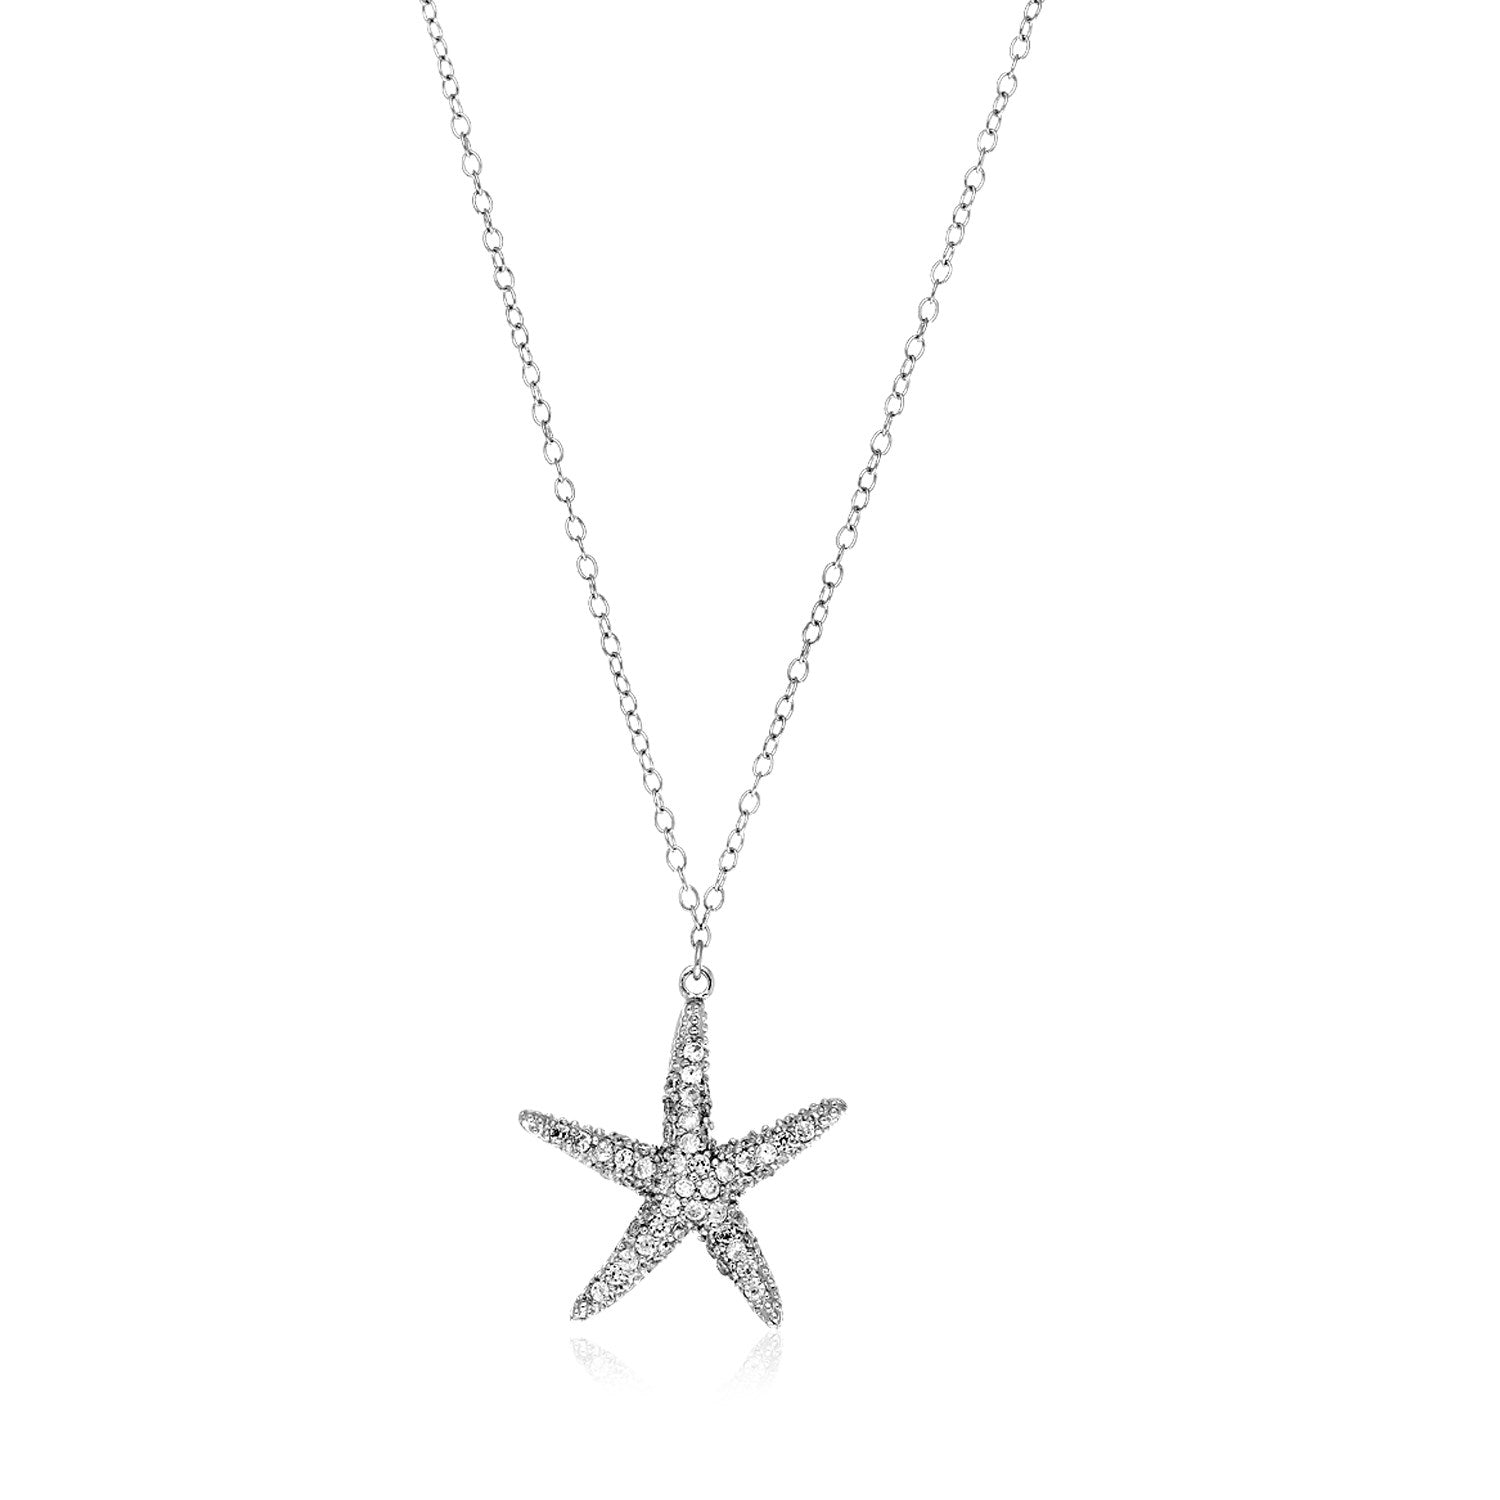 Sterling Silver Large Starfish Necklace with Cubic Zirconias